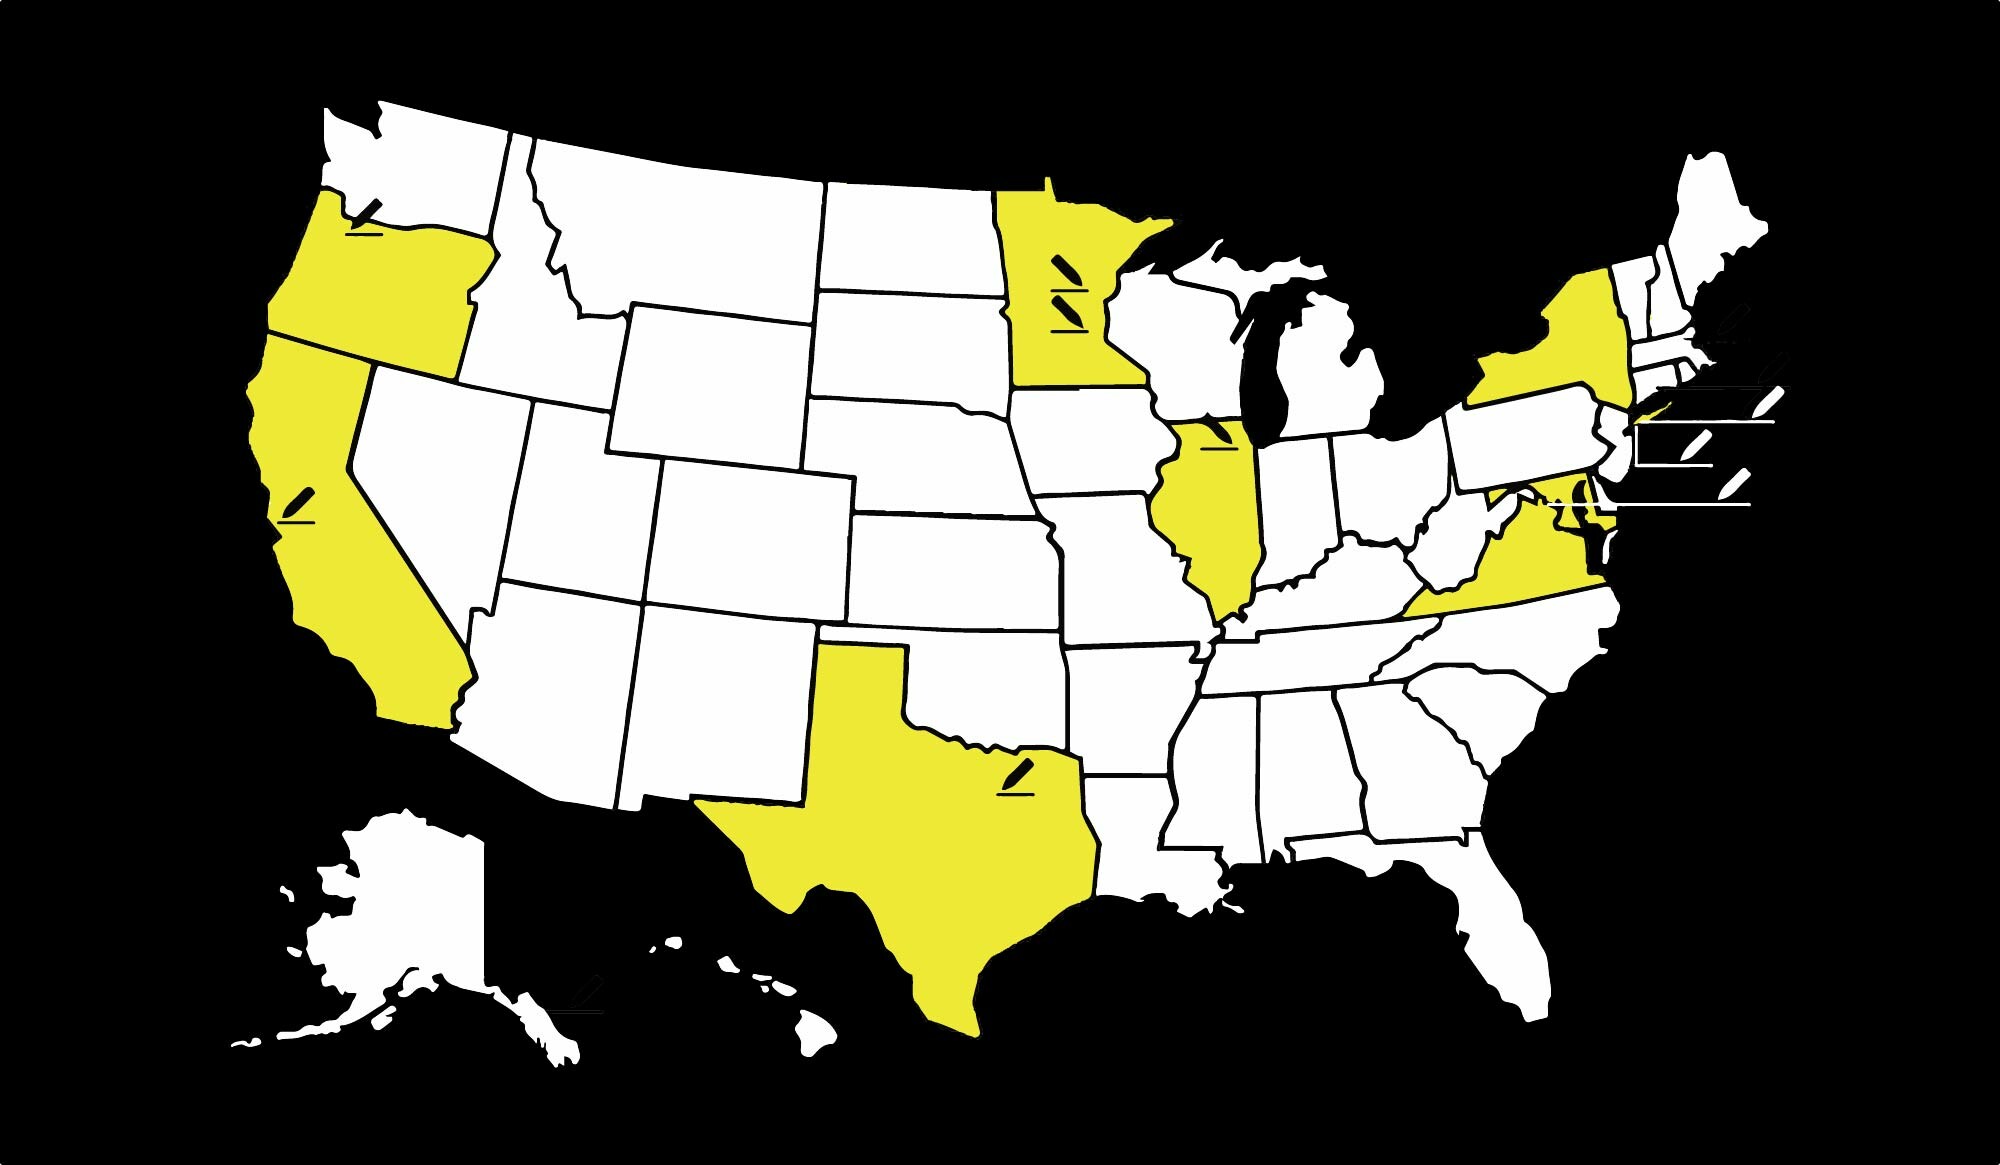 black, white, and yellow map of the United States indicating residency locations